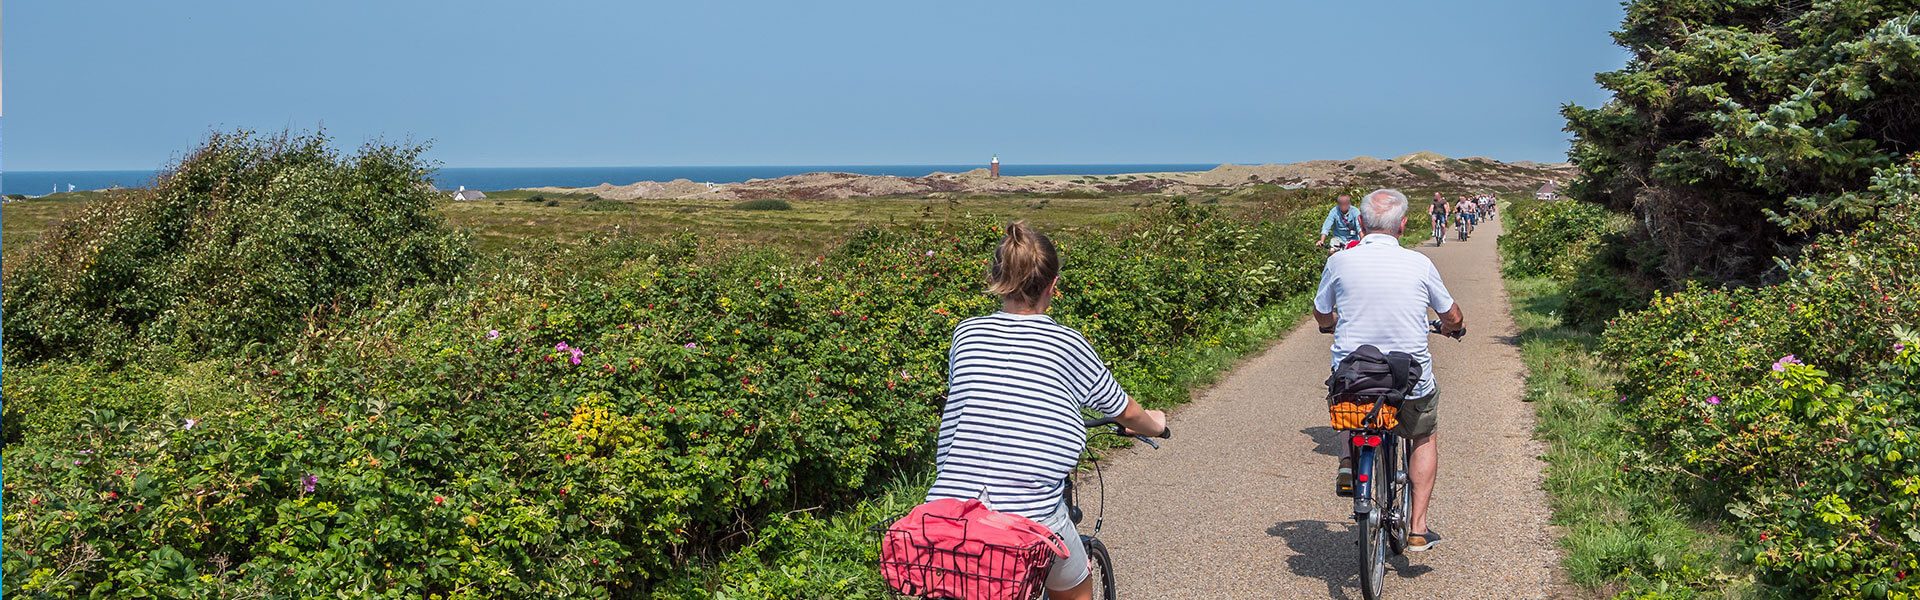 Cycling tour on the incentive trip Sylt | b-ceed Eventagentur